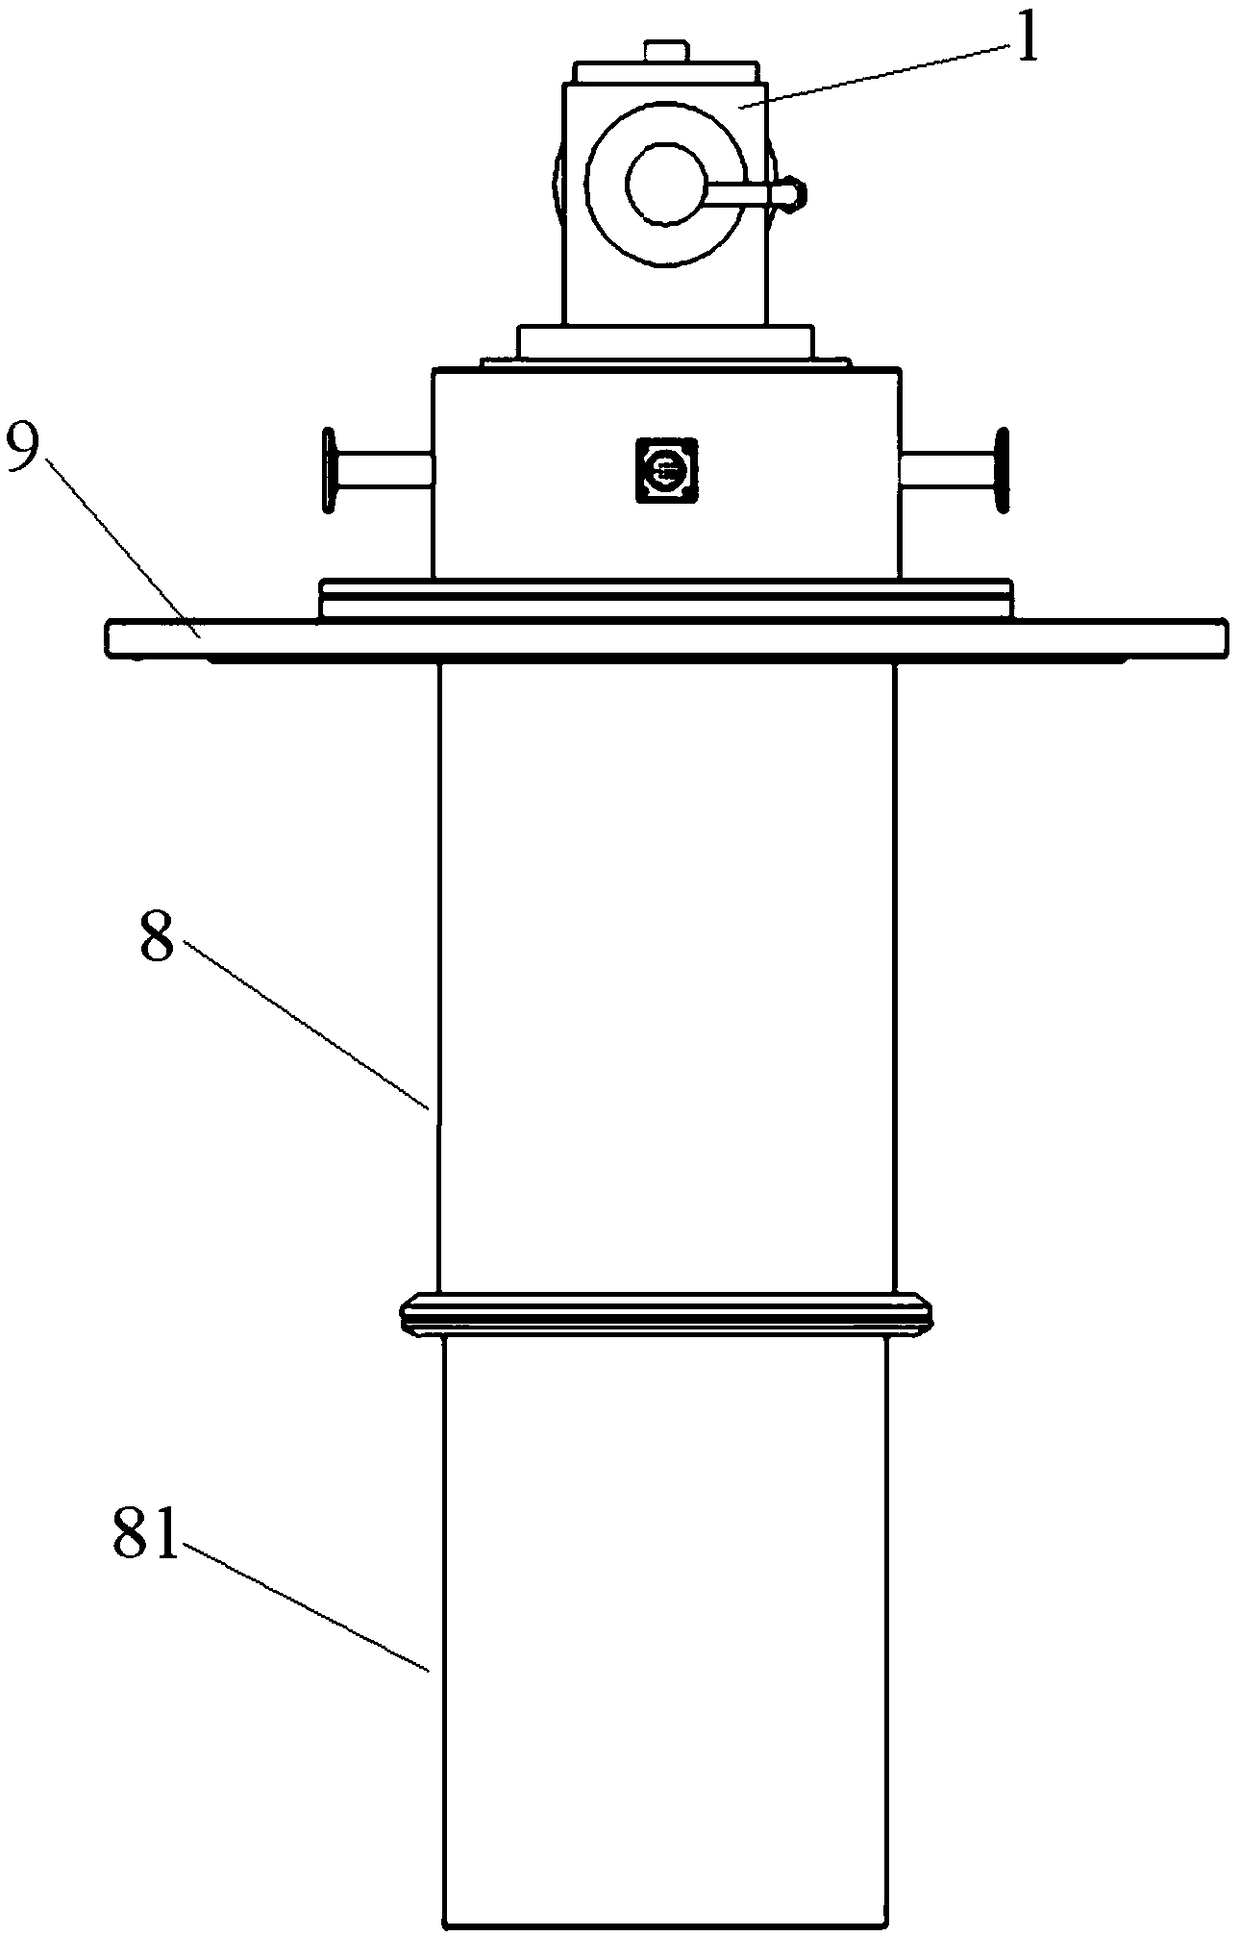 Sample environment coupling loading device for neutron scattering